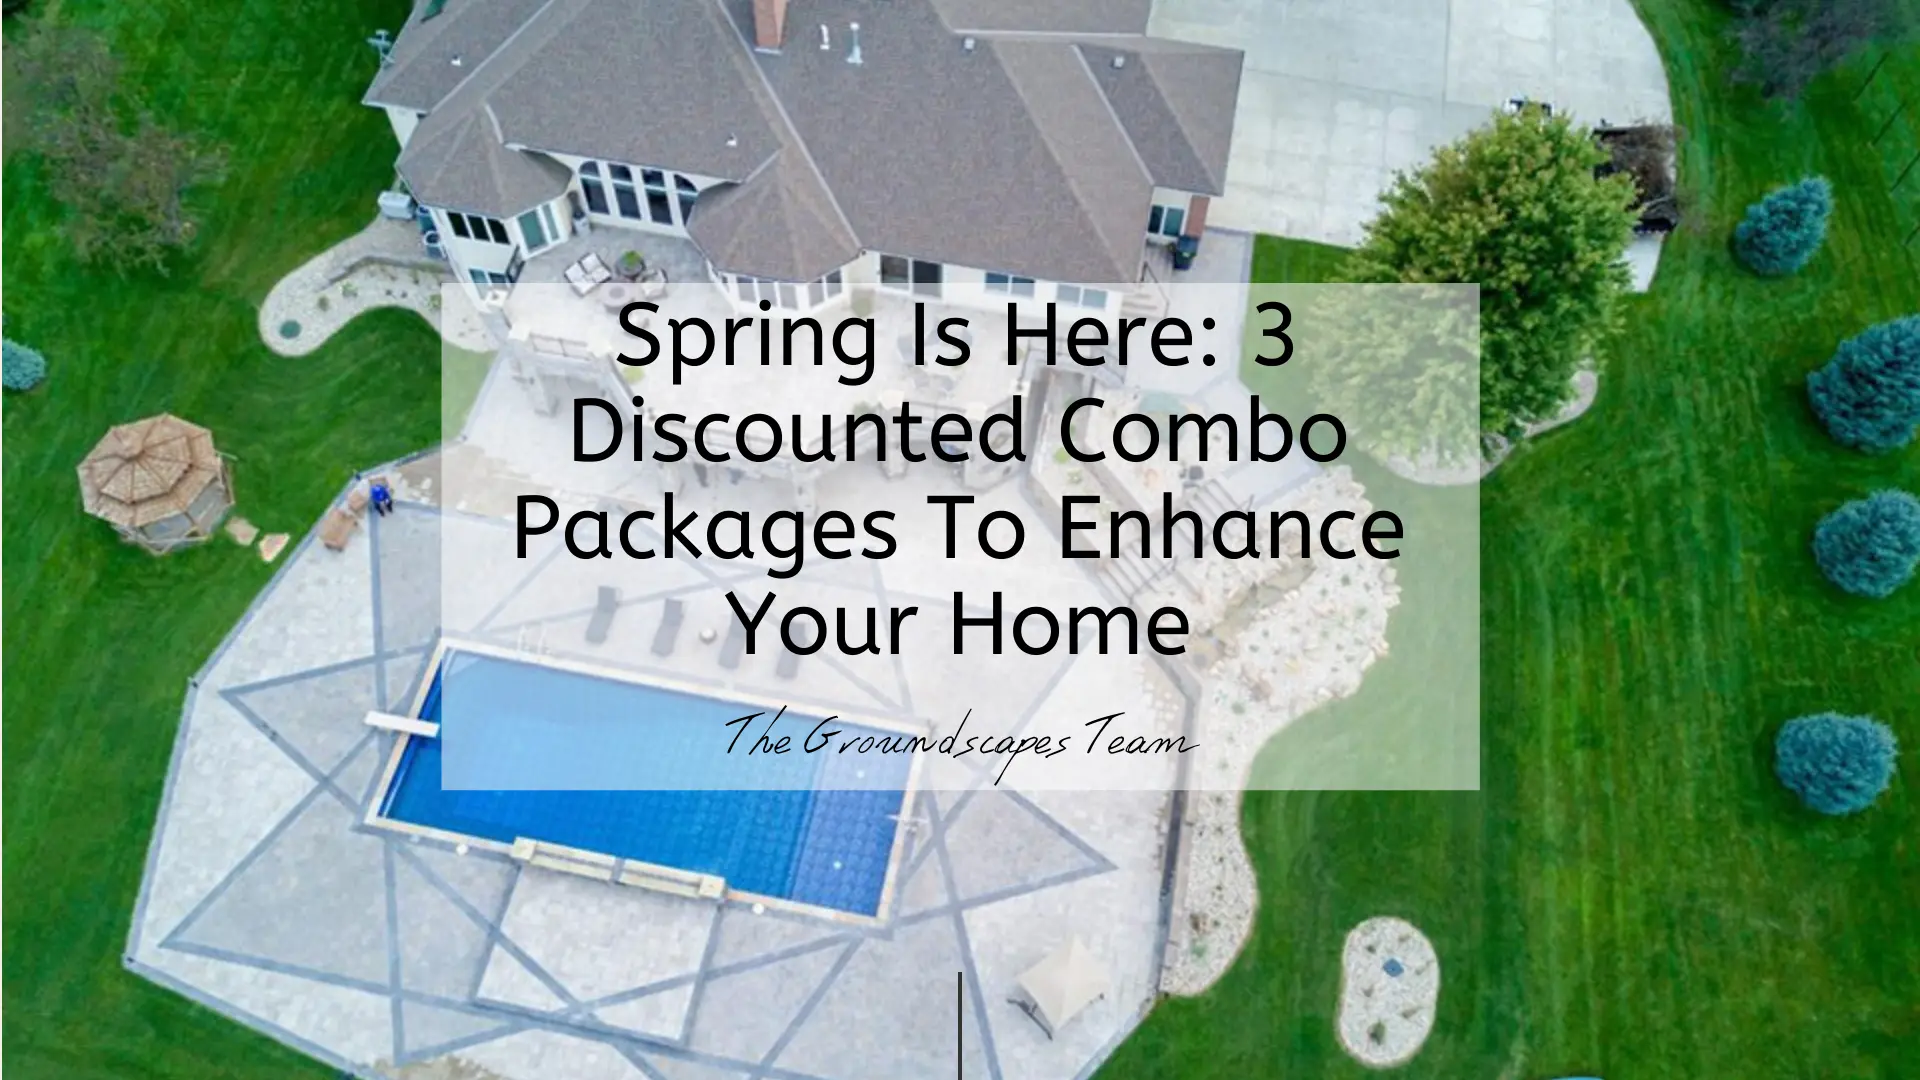 Spring Is Here: 3 Discounted Combo Packages To Enhance Your Home